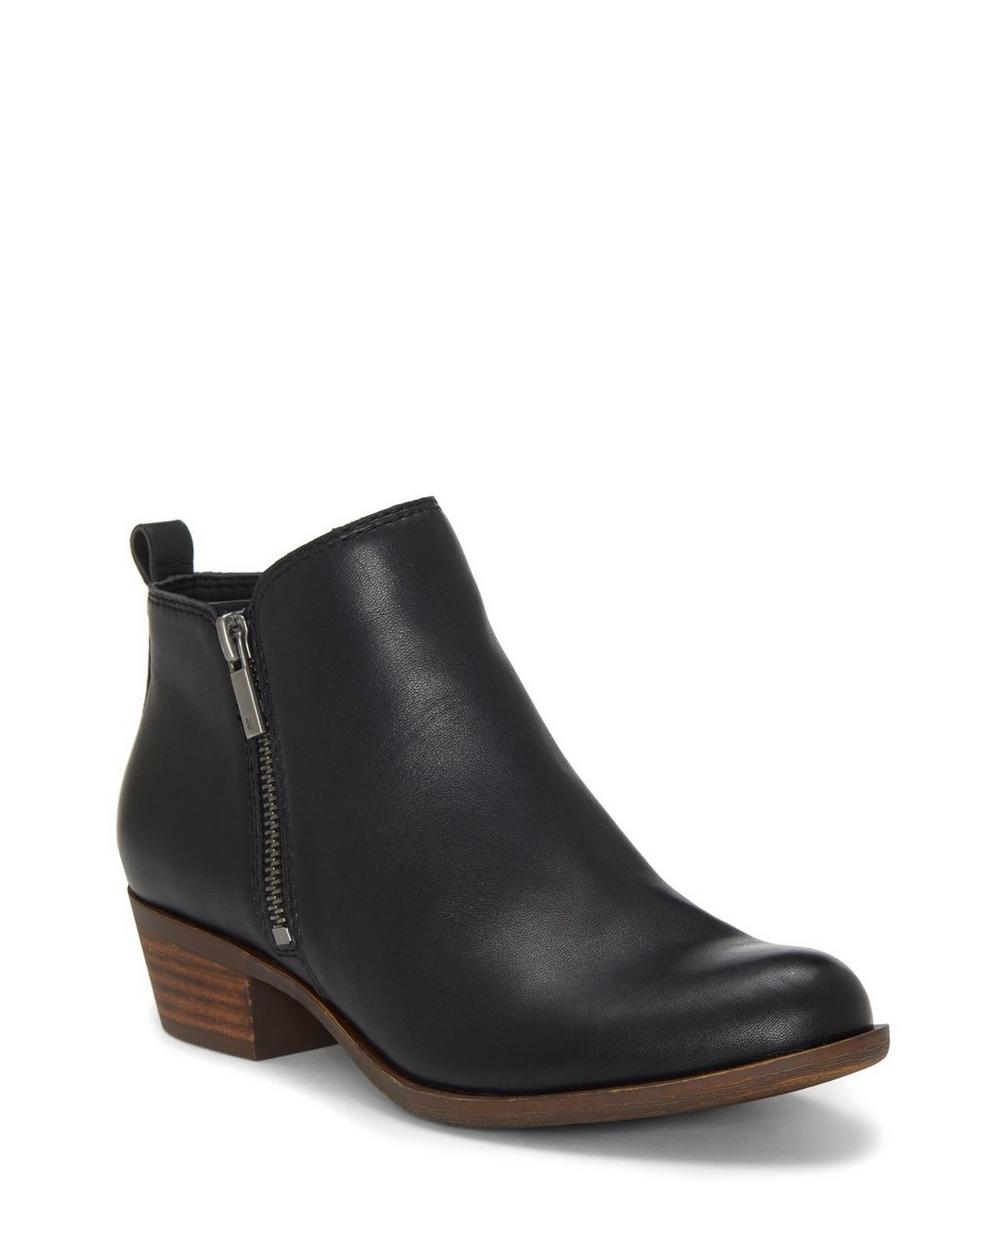 Lucky Brand Women's Basel Bootie Black Leather Wide width Ankle Boot